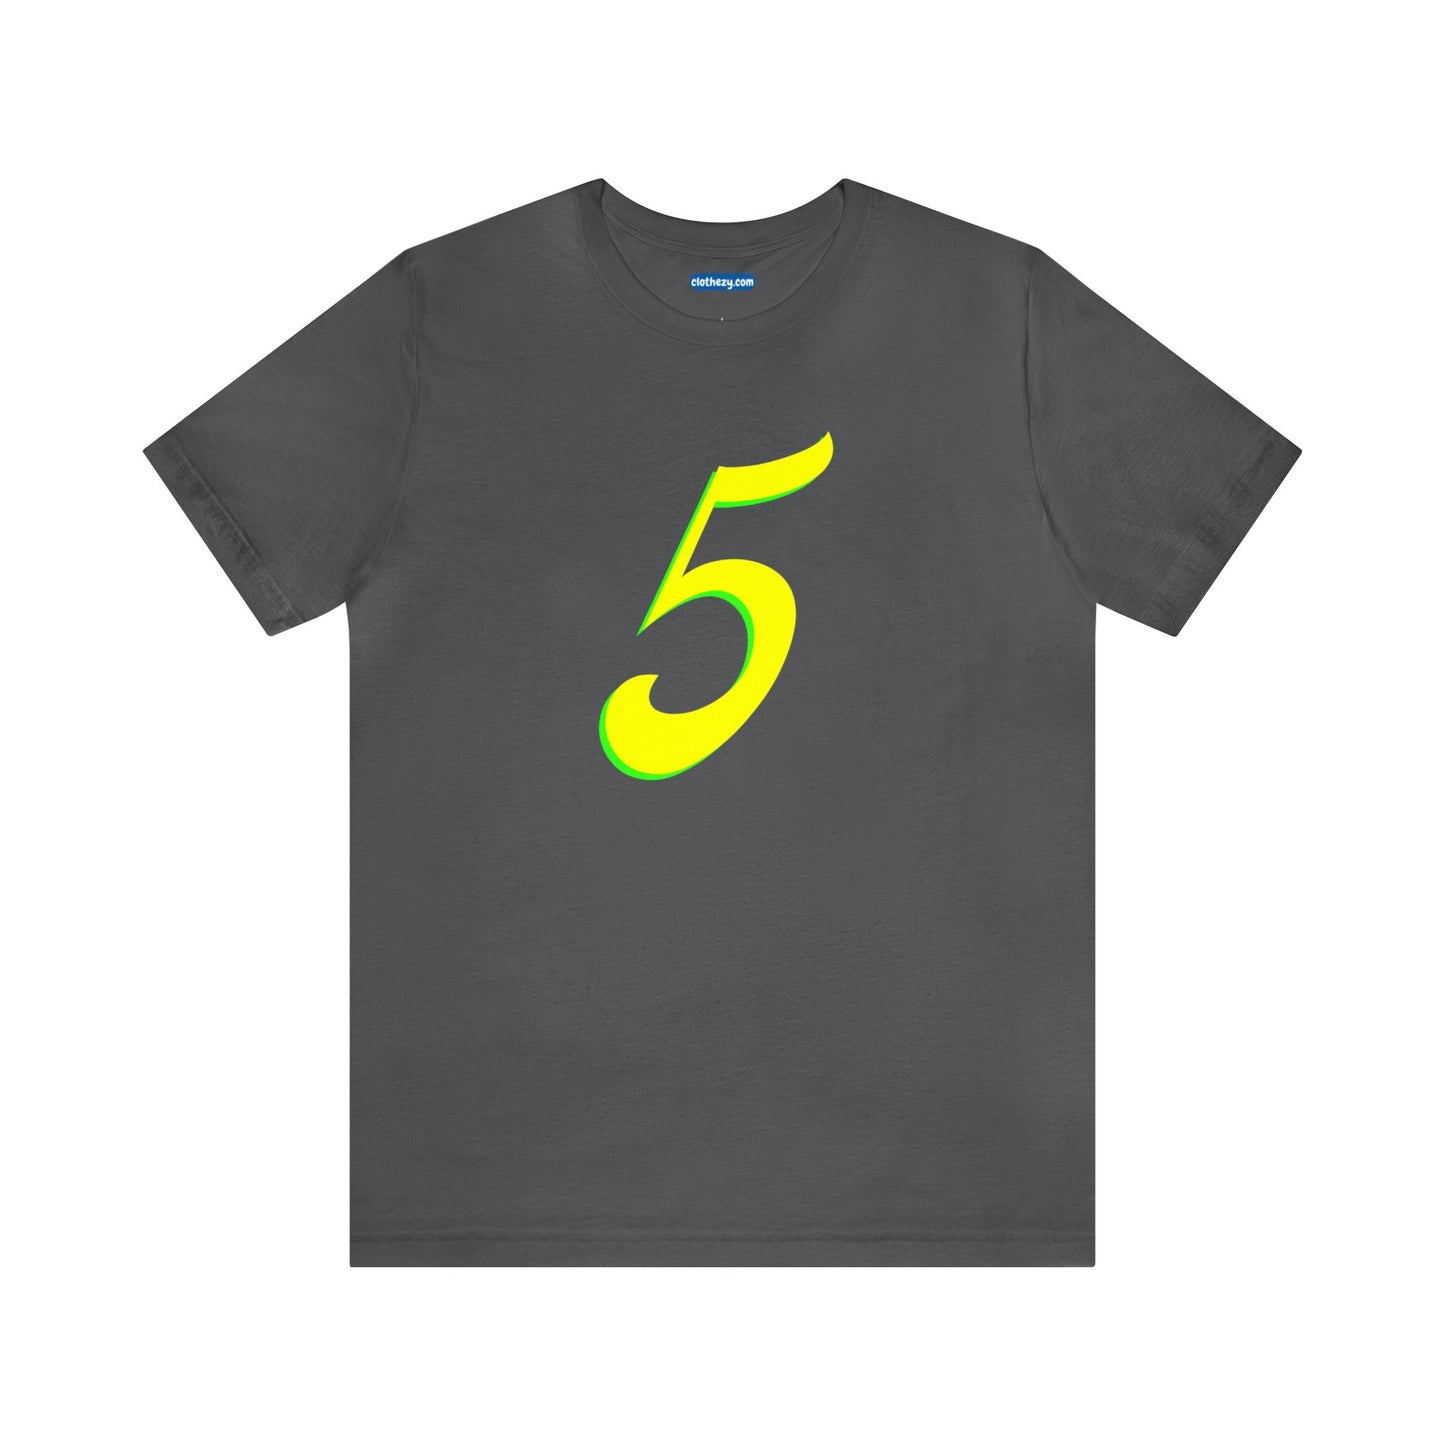 Number 5 Design - Soft Cotton Tee for birthdays and celebrations, Gift for friends and family, Multiple Options by clothezy.com in Black Size Small - Buy Now